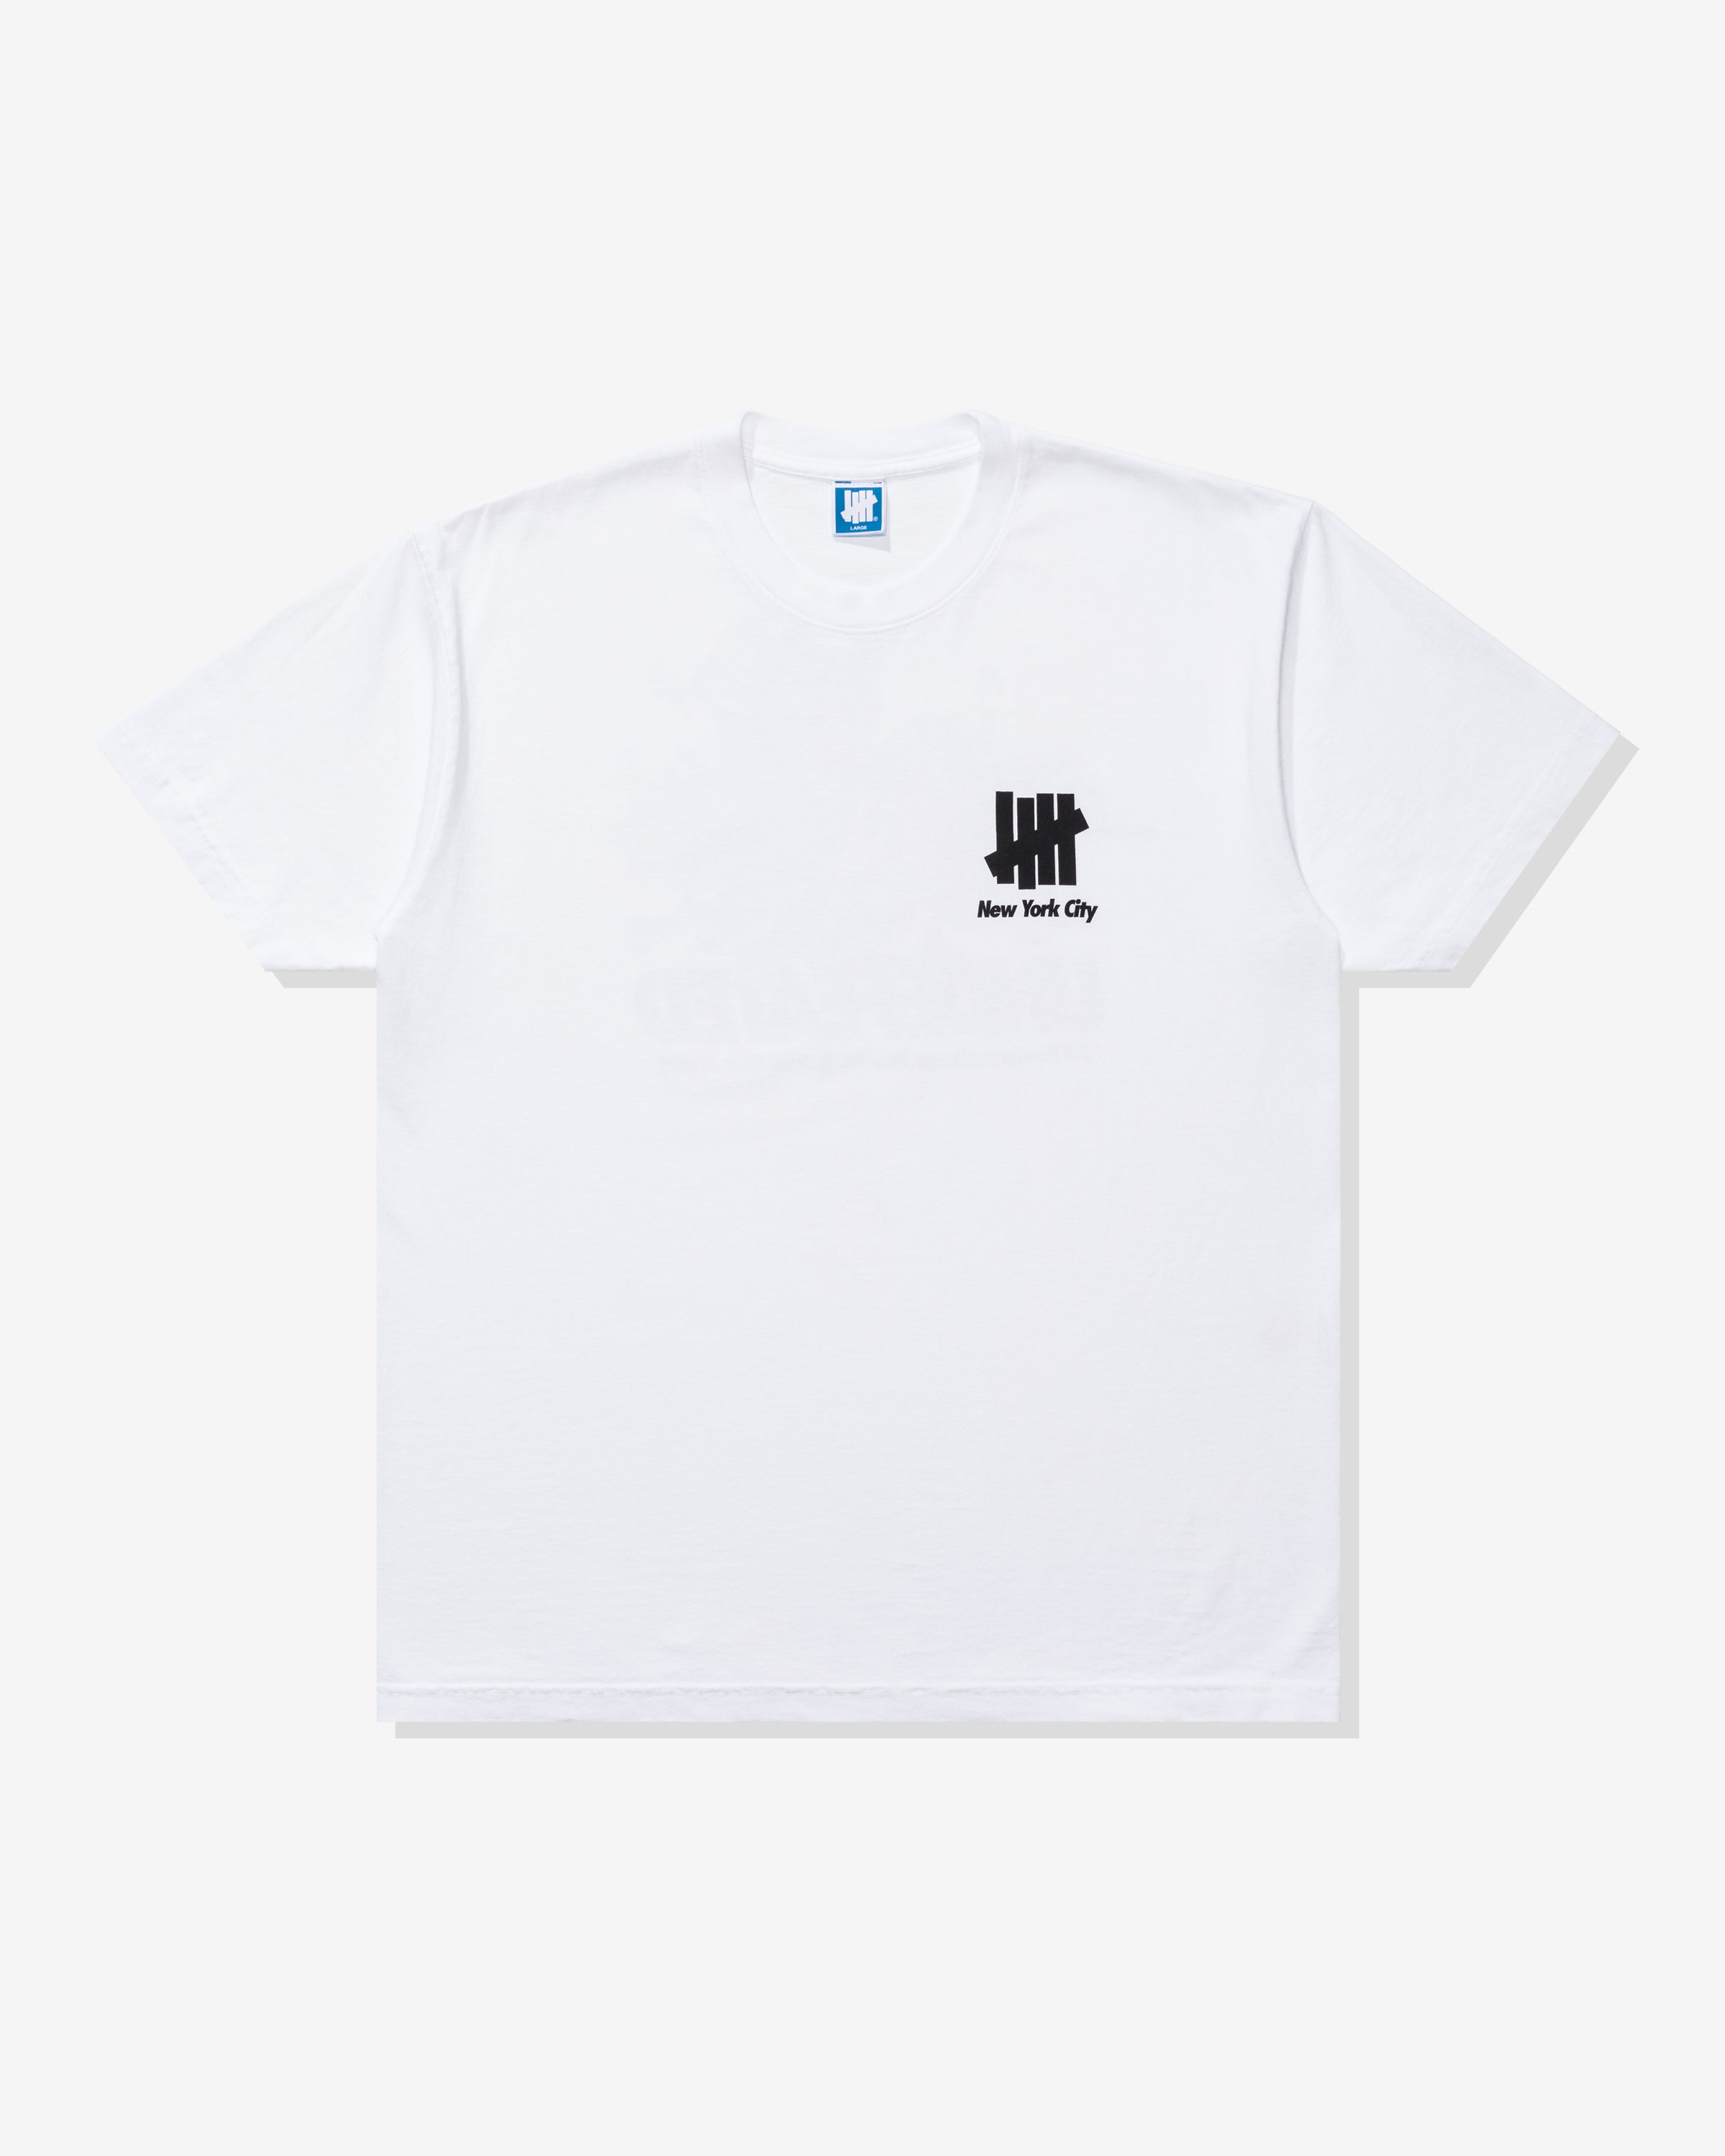 UNDEFEATED NYFC COLLAGE S/S TEE - WHITE